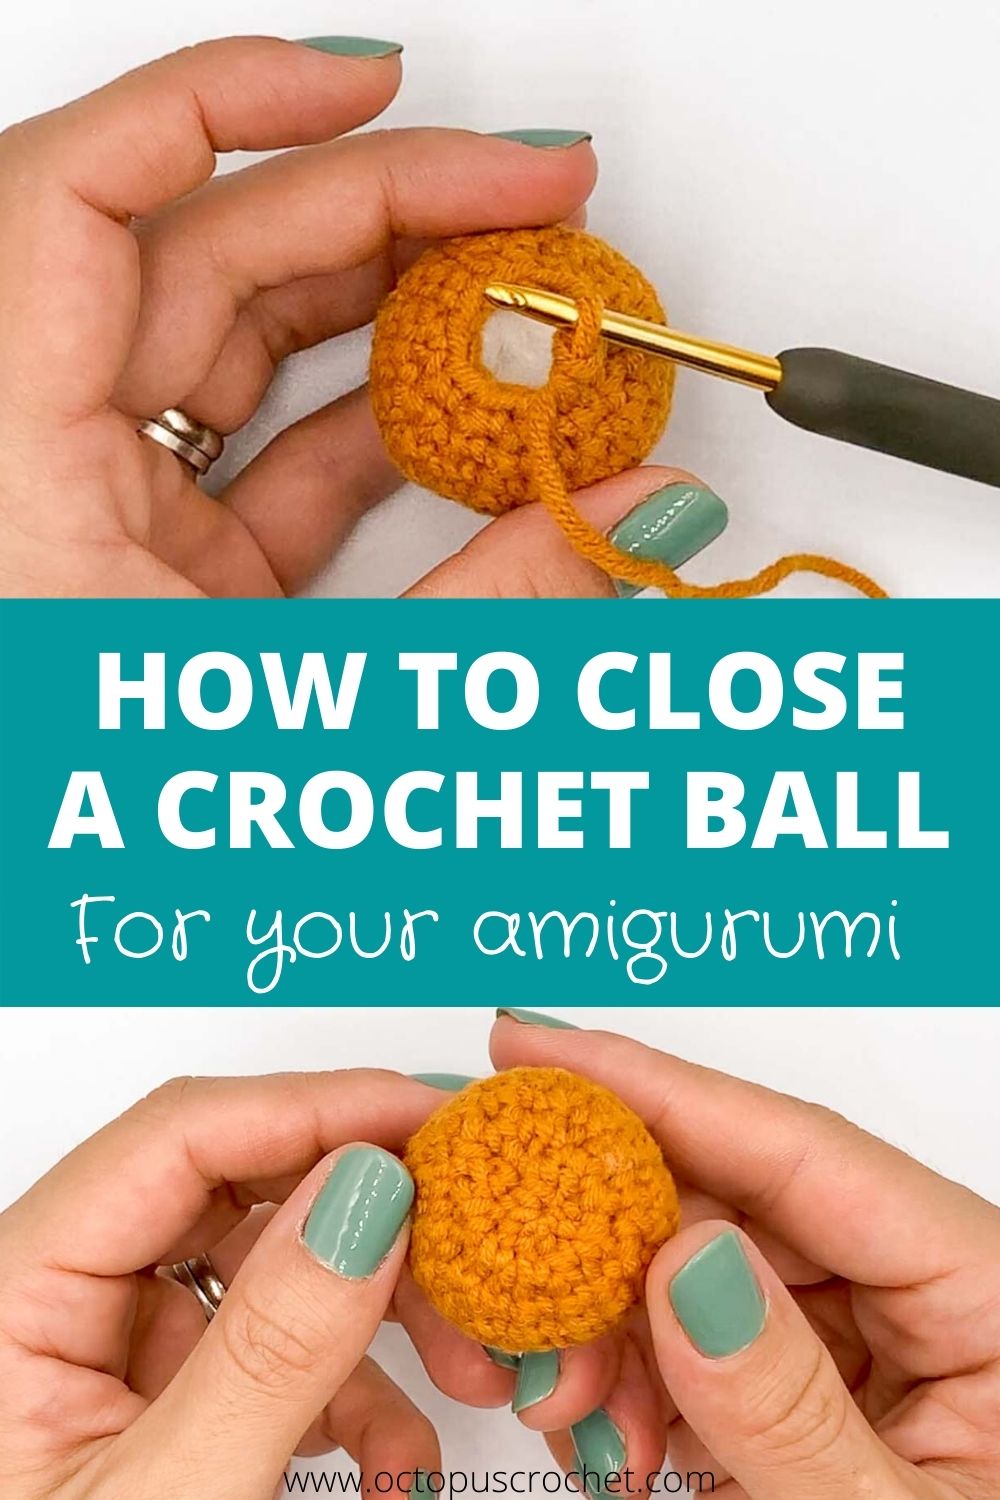 How to close a crochet ball for your amigurumi projects - Octopus Crochet